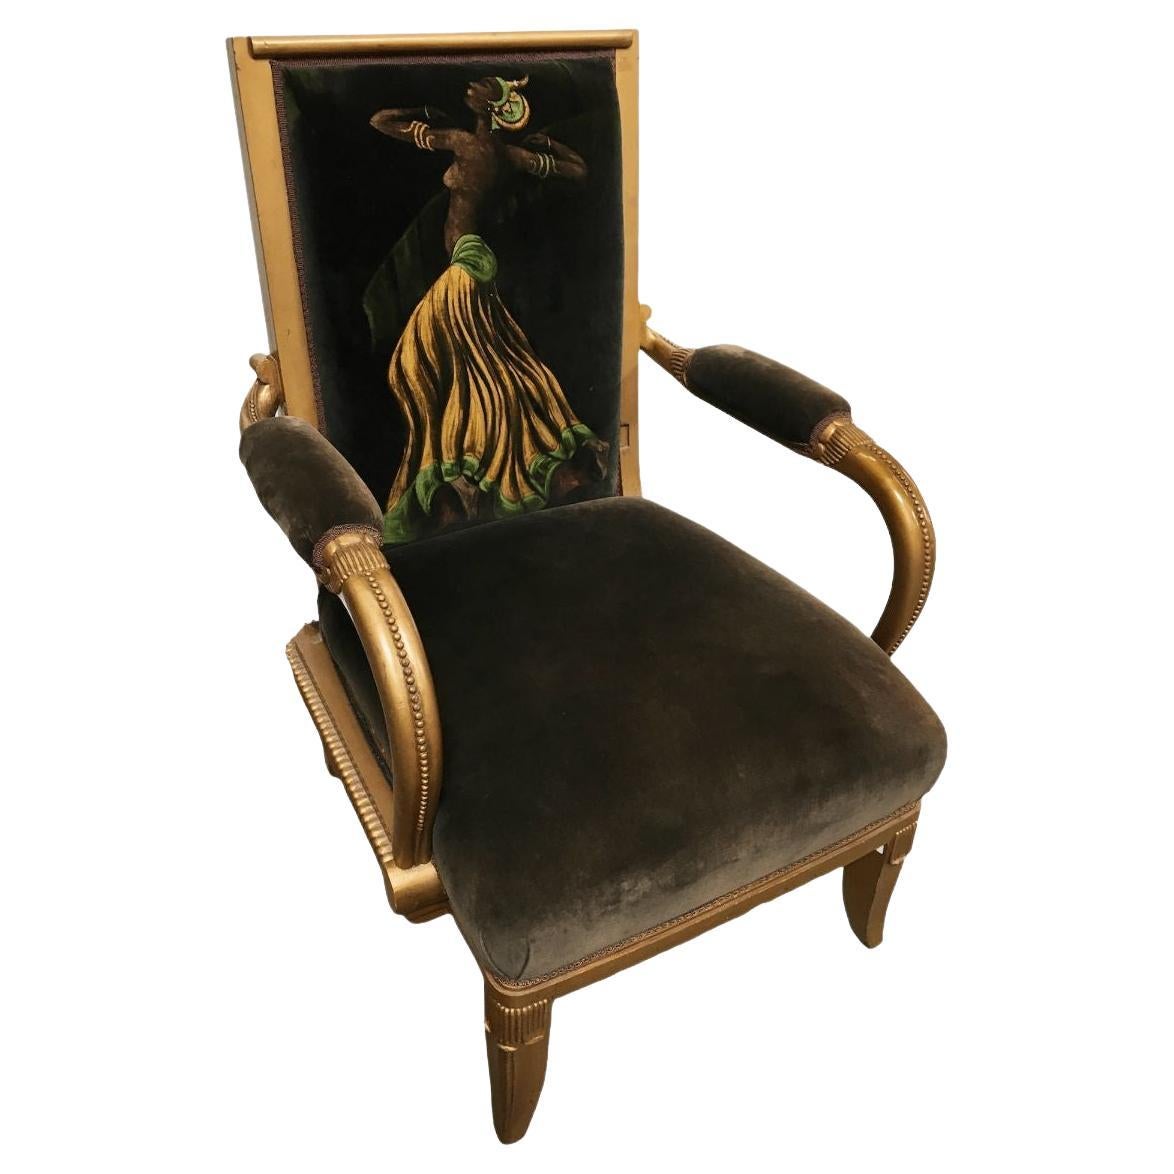 Vintage Velvet Upholstered Gorgeous Armchair with a Painted Dancer on the Back For Sale